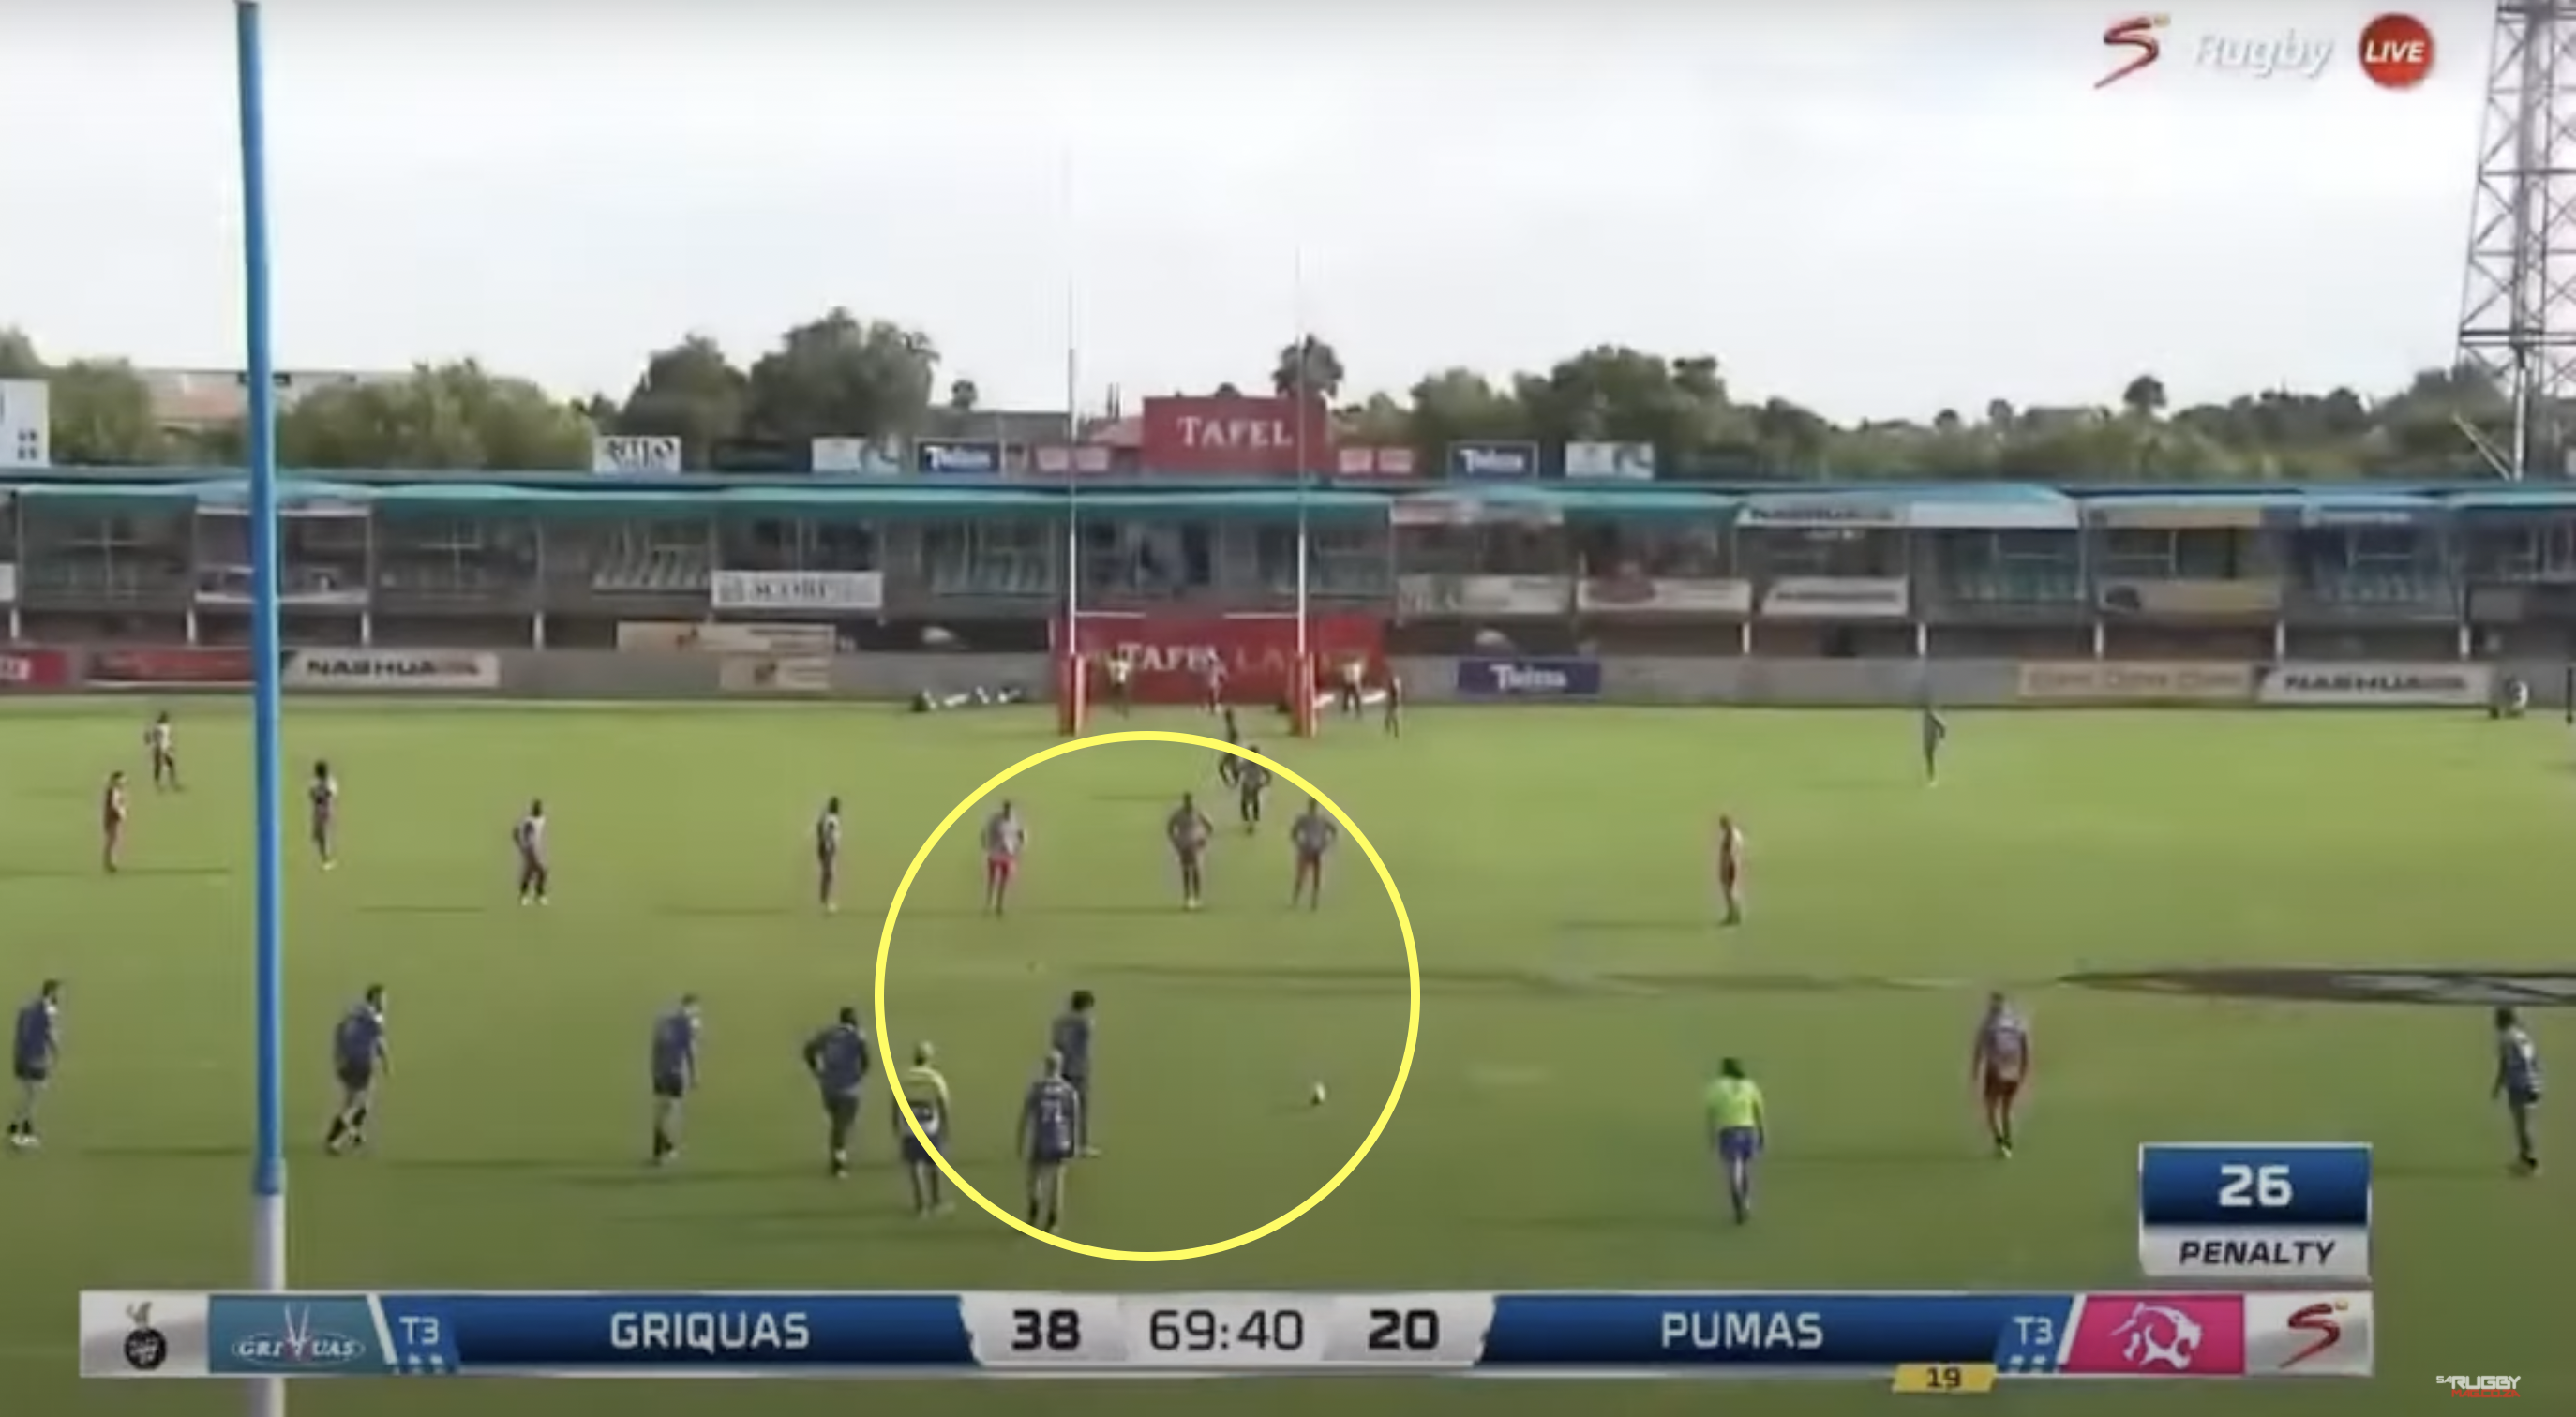 New Frans Steyn 2.0 kicks monster penalty that the RWC winner could only dream of